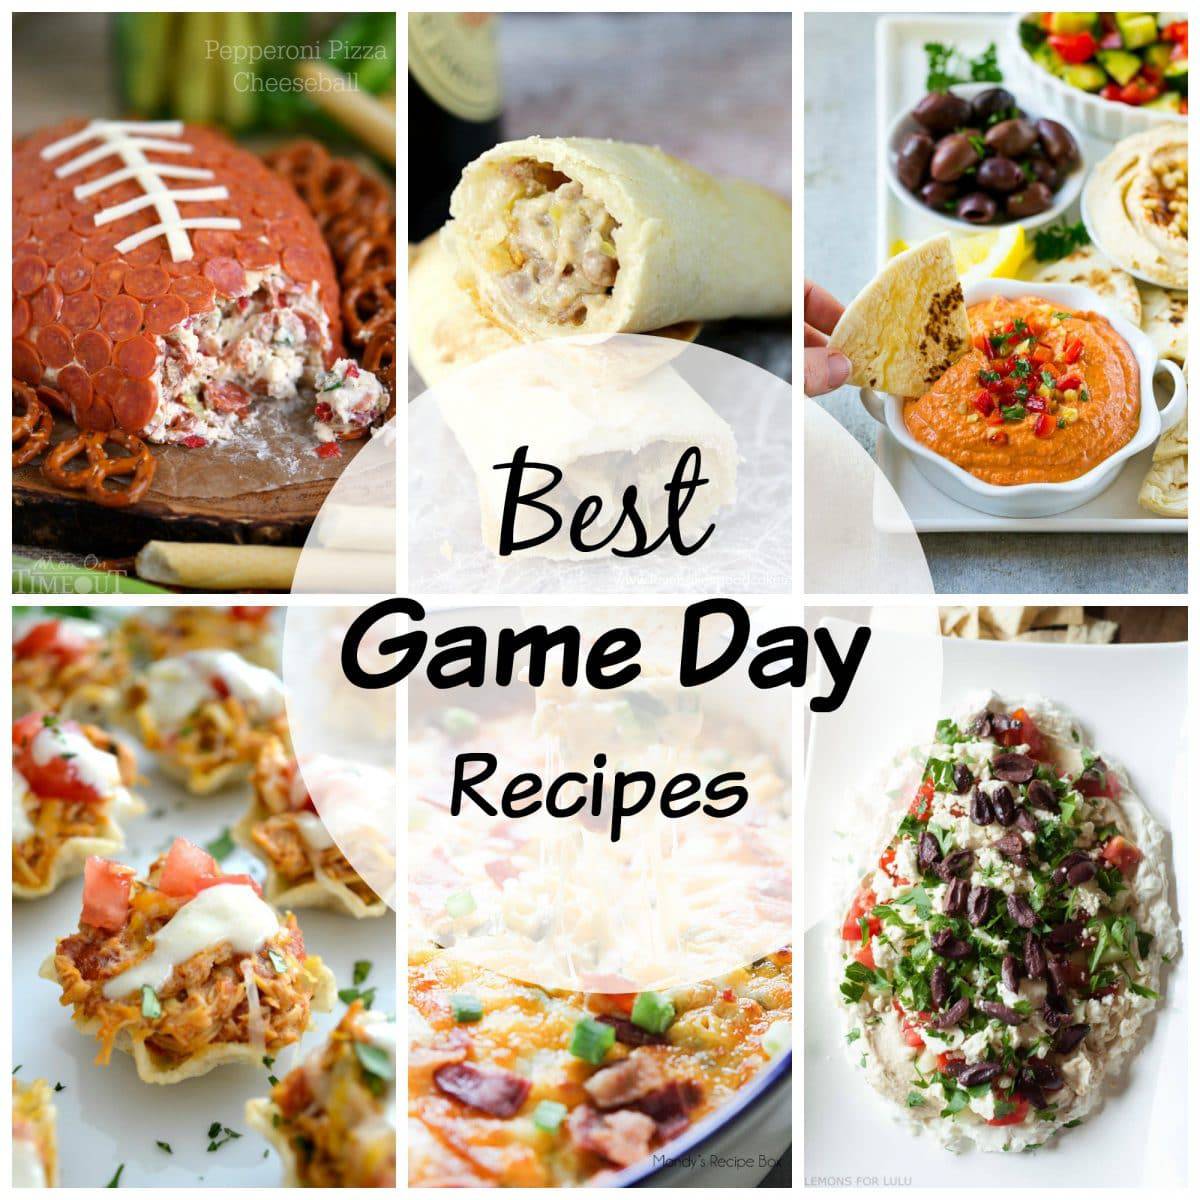 Here is a collection of the Best Game Day Recipes to share with your friends! 